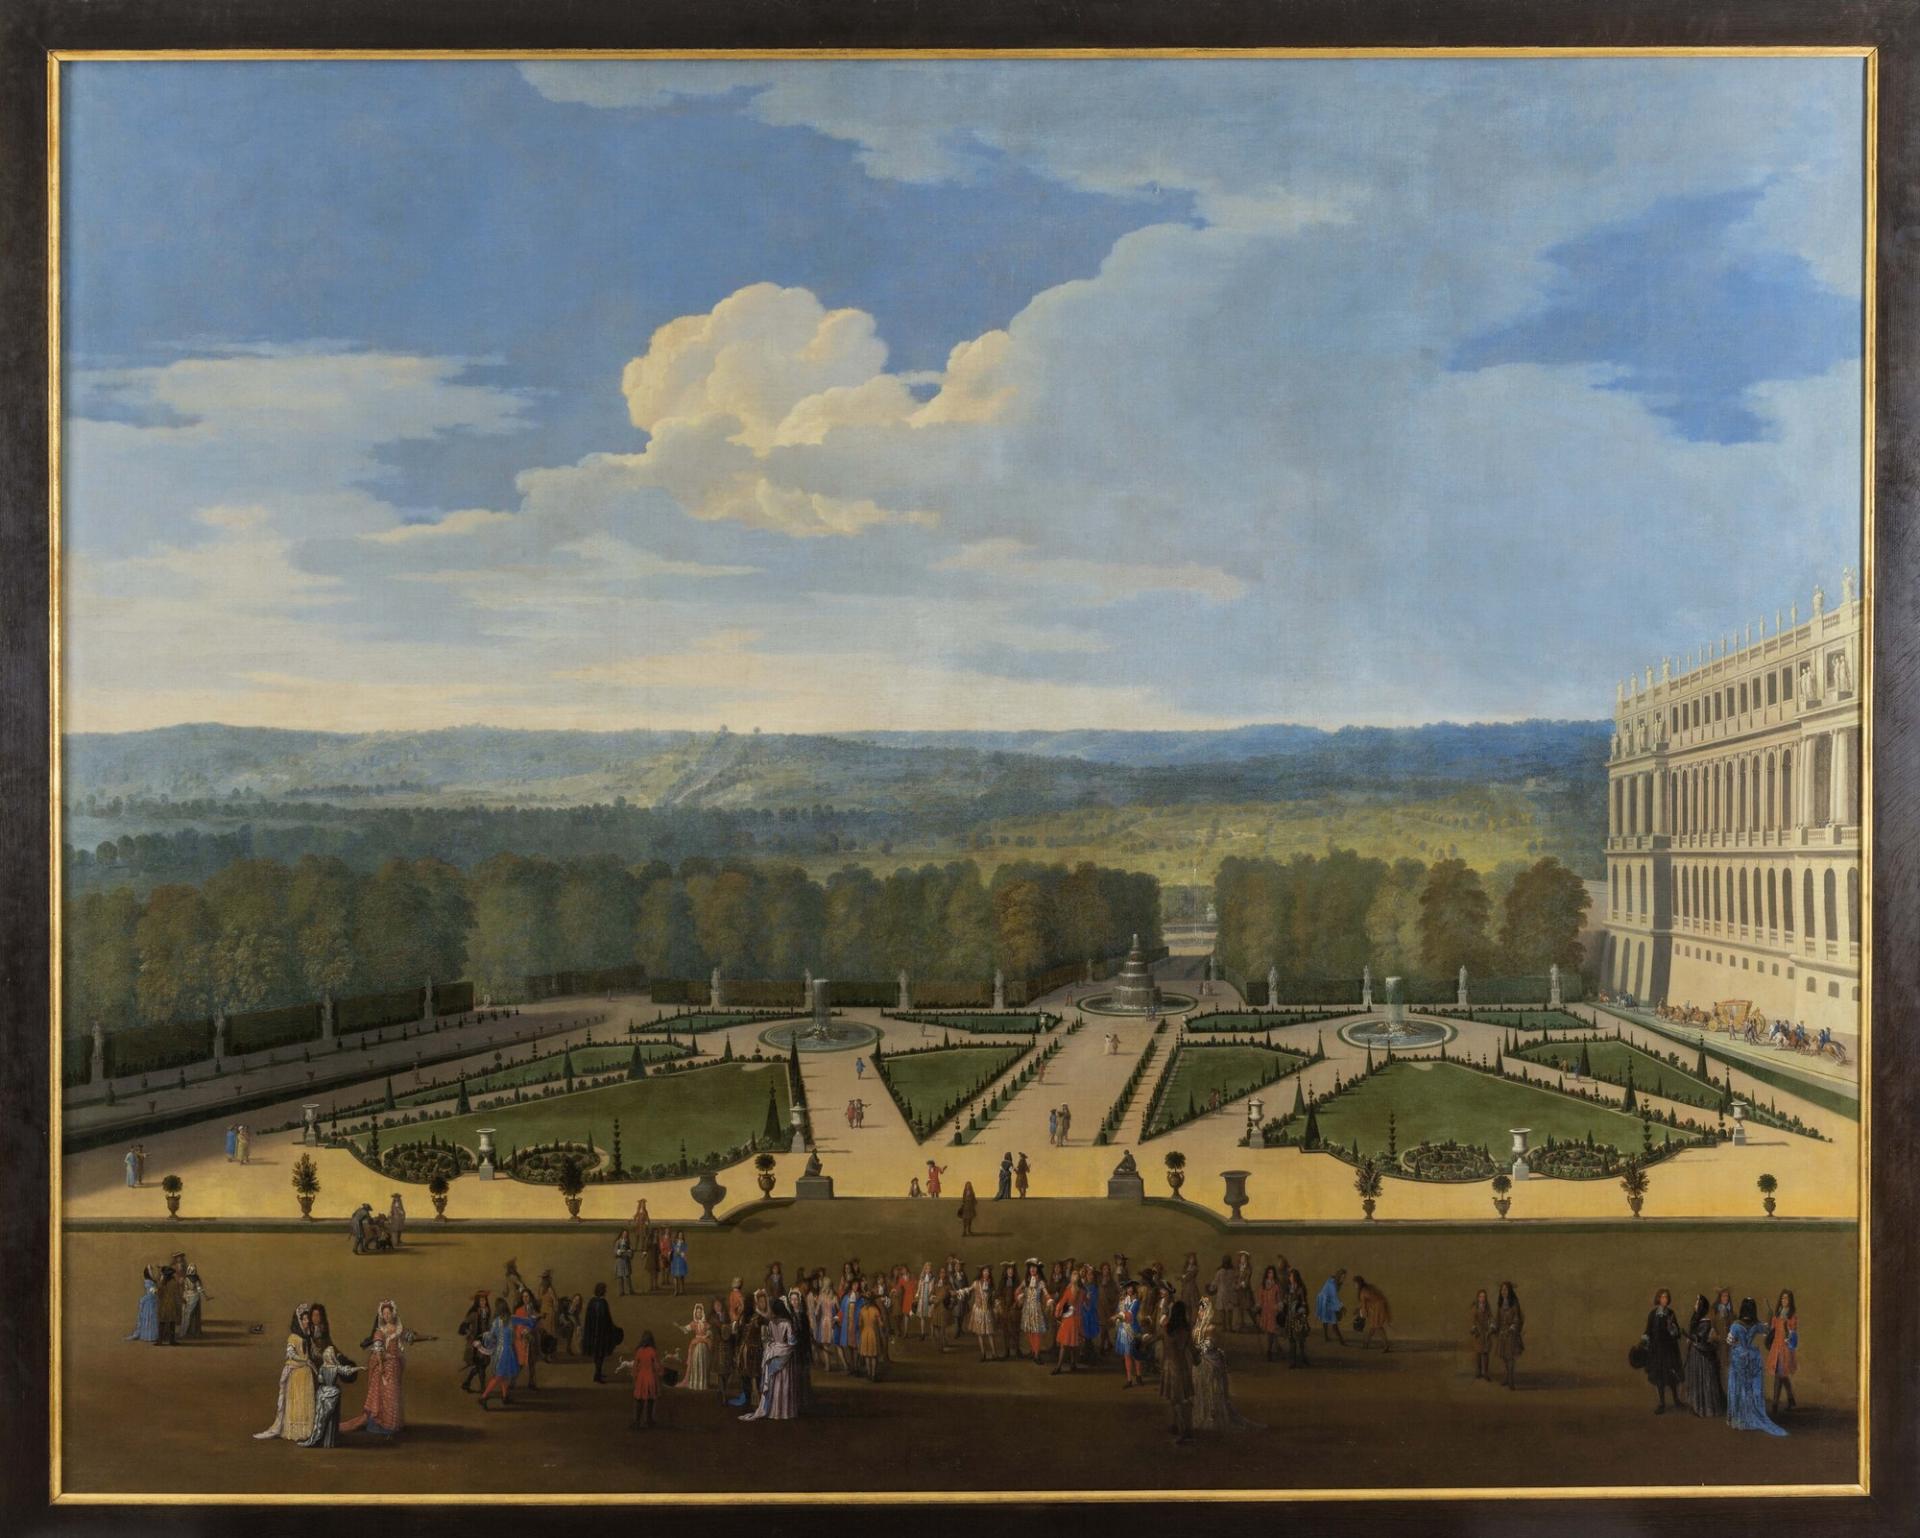 Versailles and the Royal Court